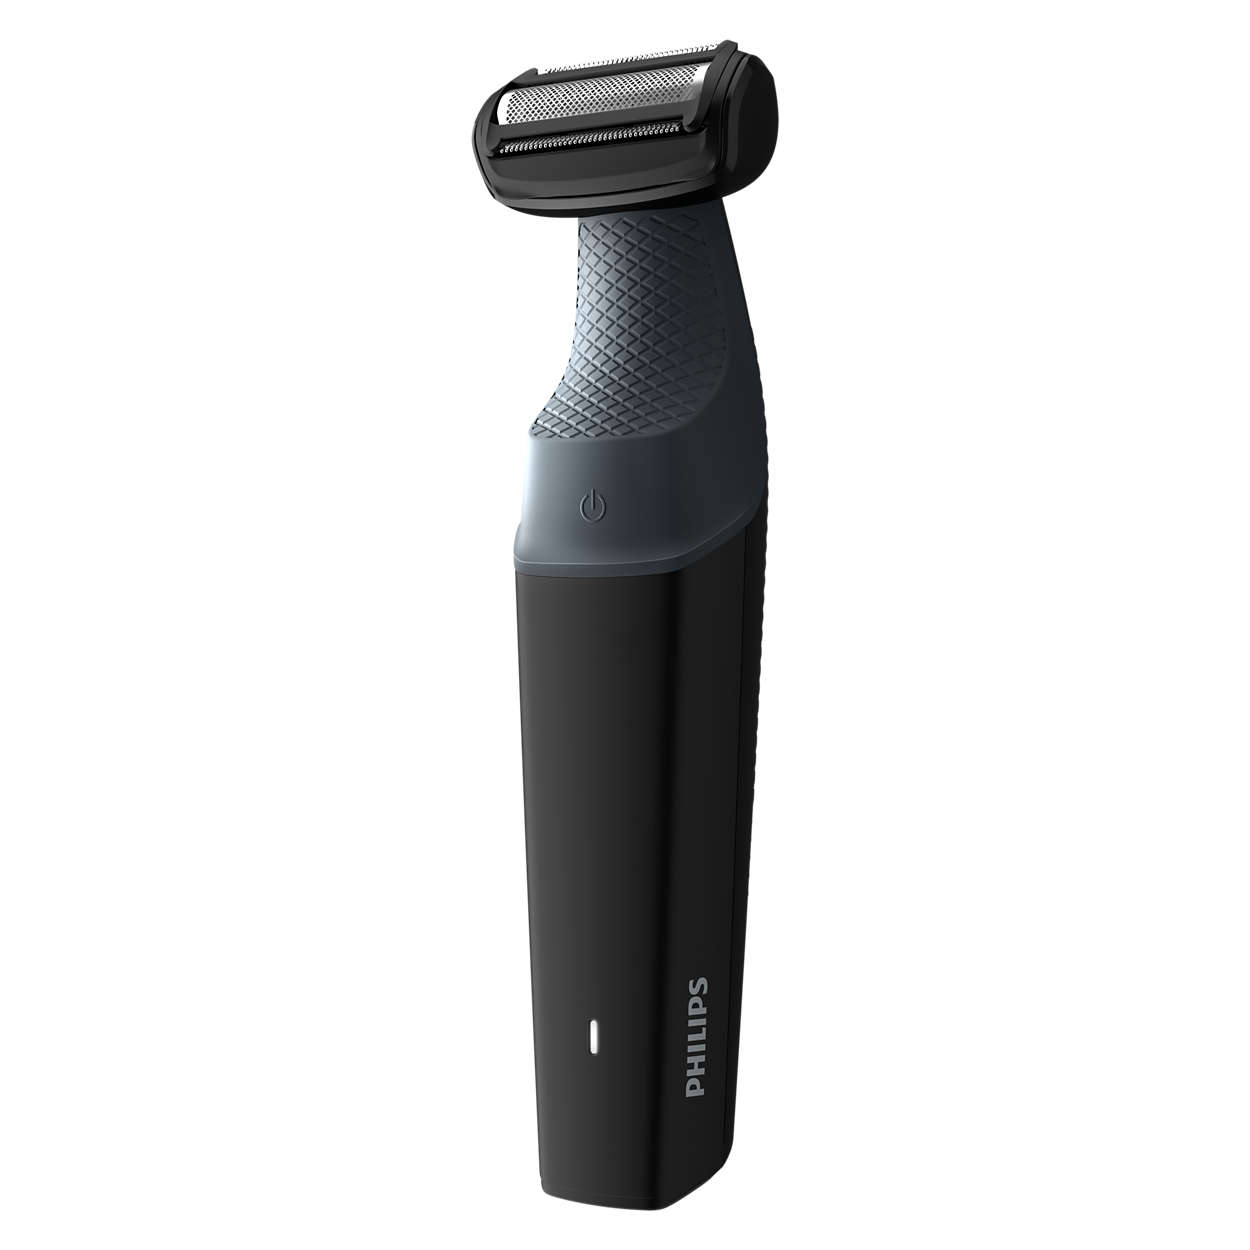 philips trimmer for underarms